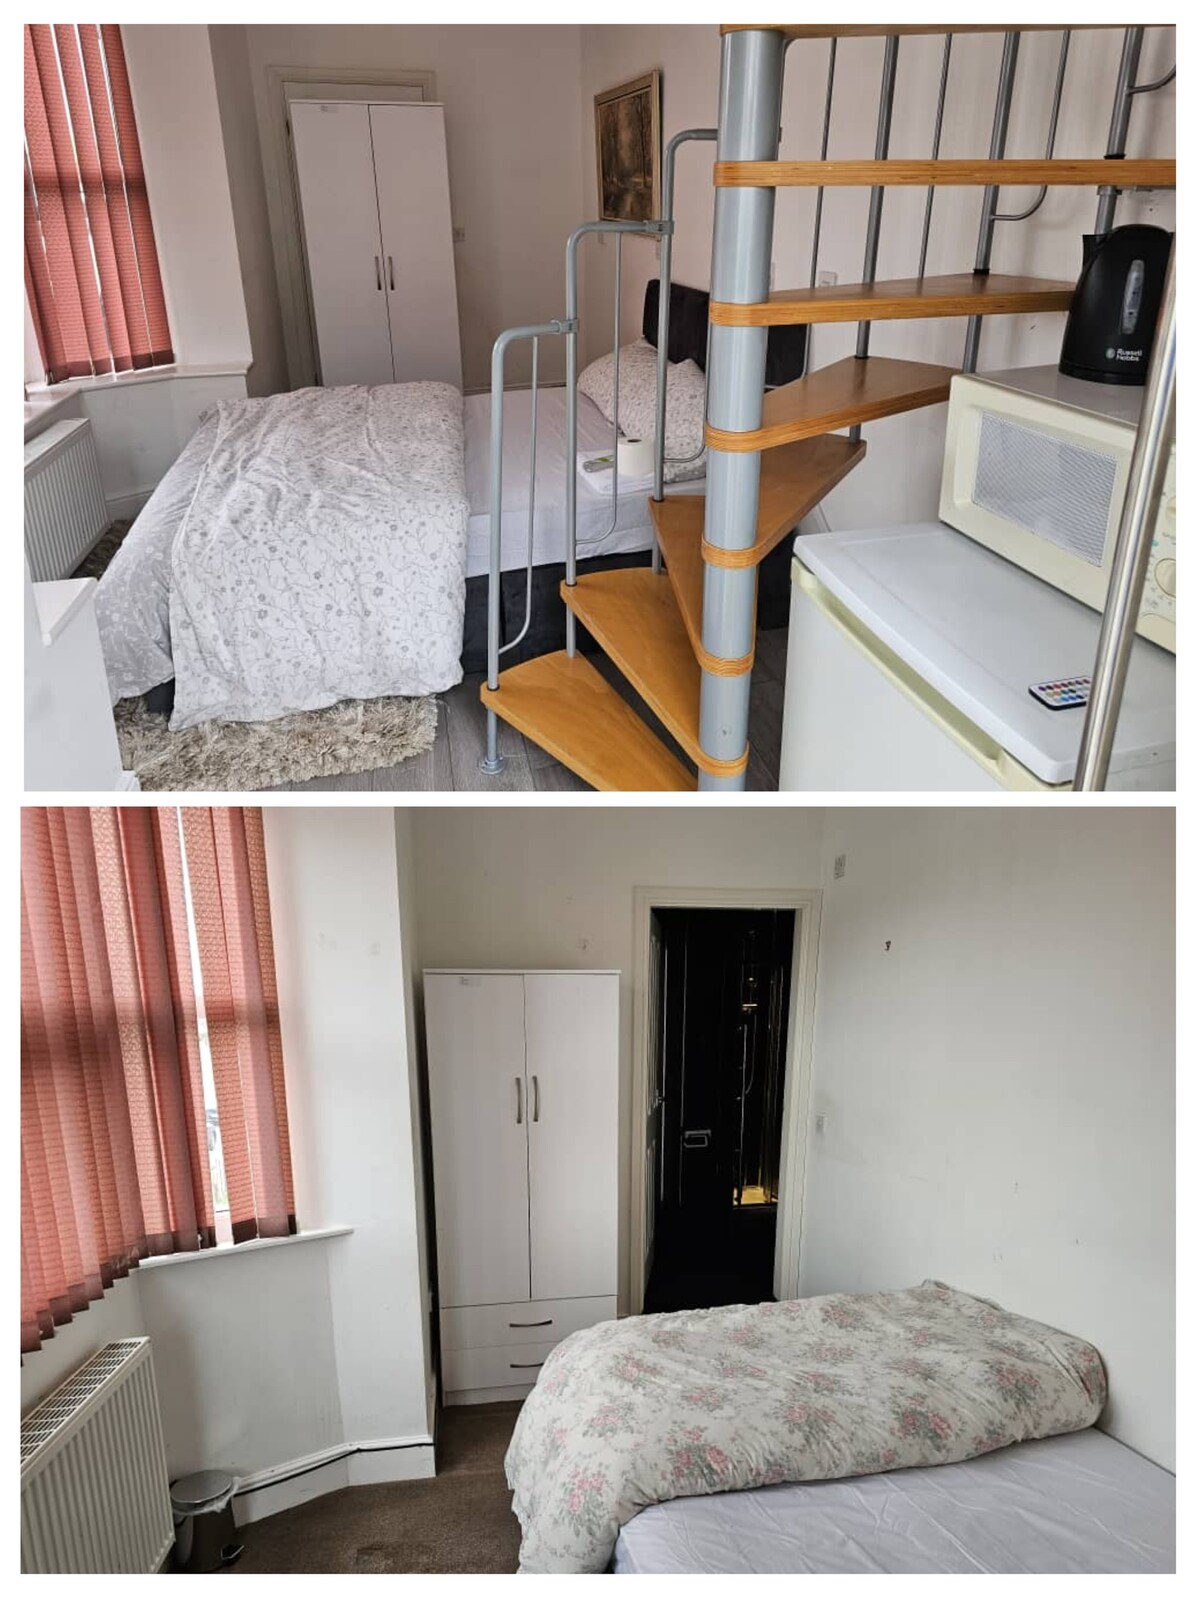 2 separate Double Room with one en-suite